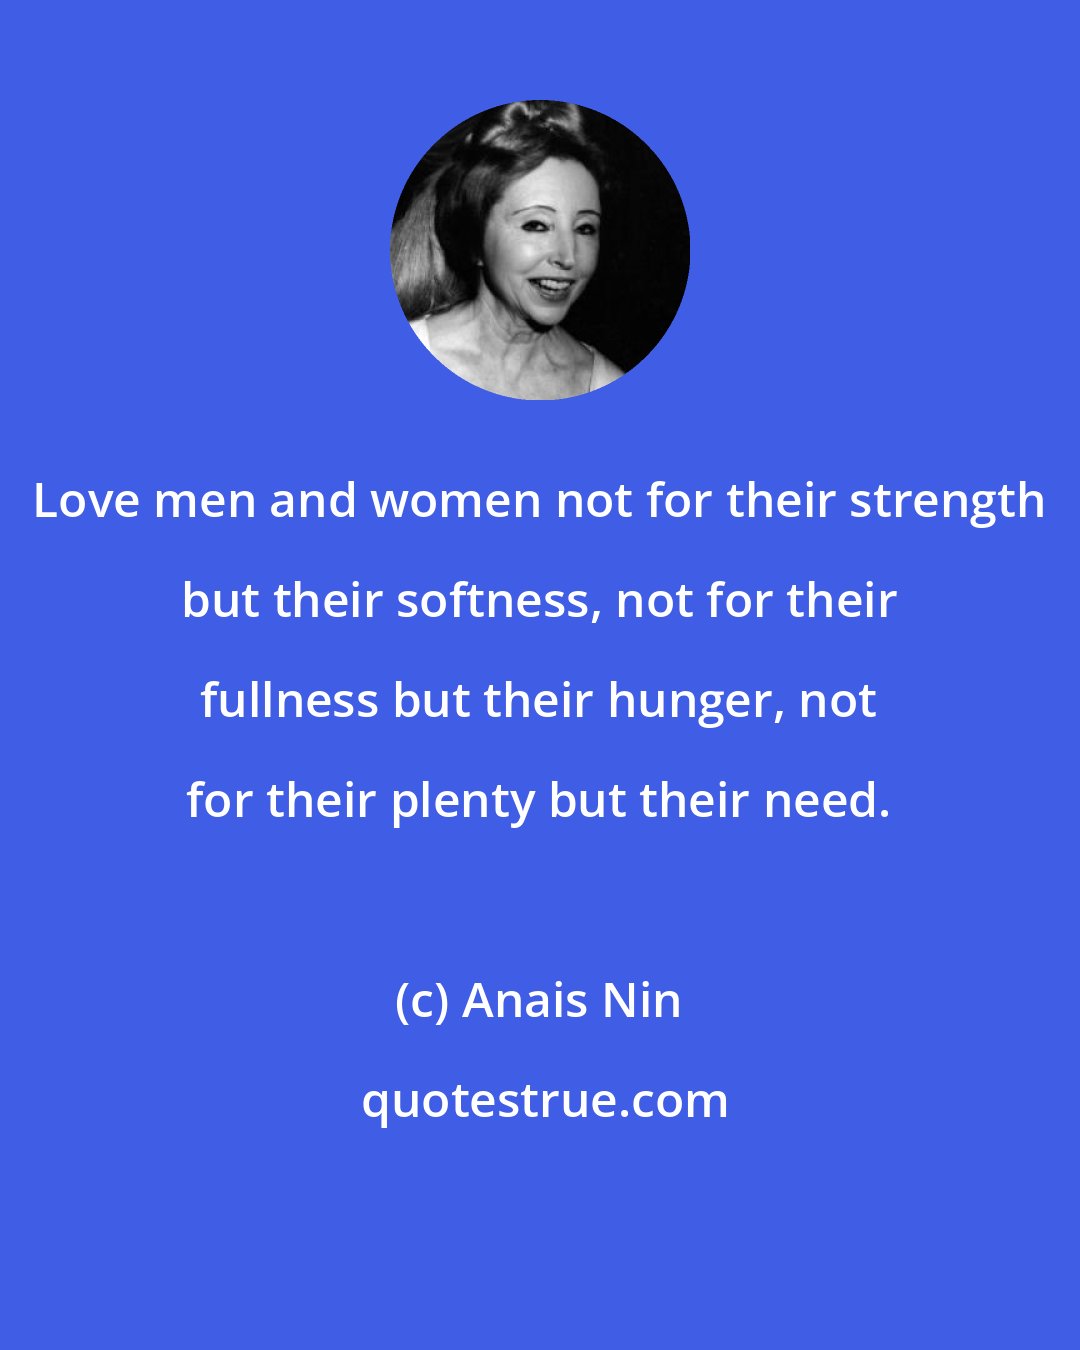 Anais Nin: Love men and women not for their strength but their softness, not for their fullness but their hunger, not for their plenty but their need.